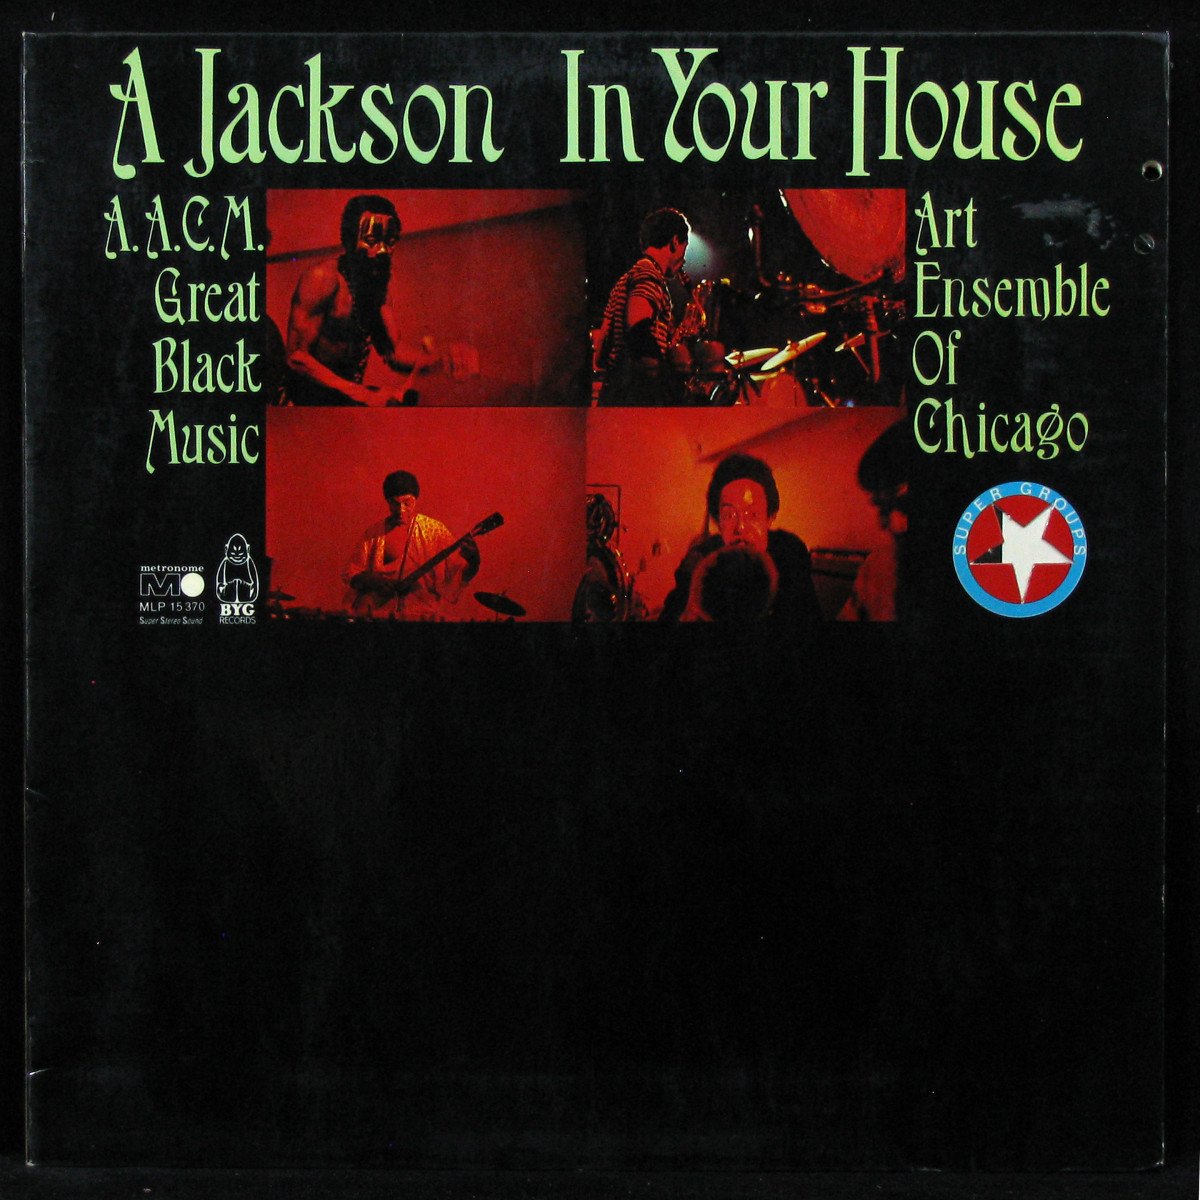 A Jackson In Your House